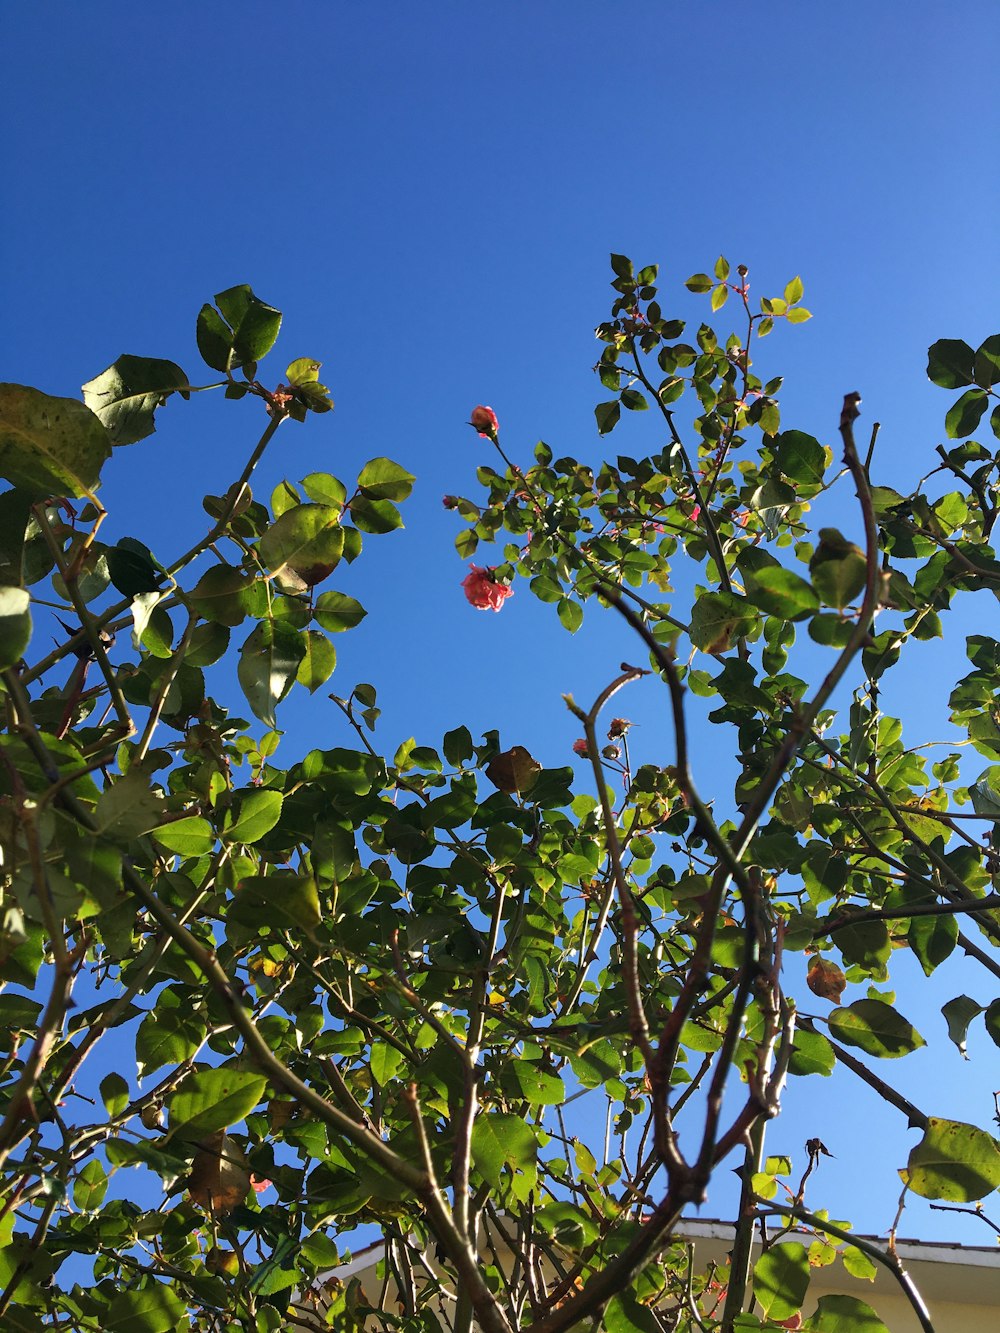 green and red fruit tree under blue sky during daytime